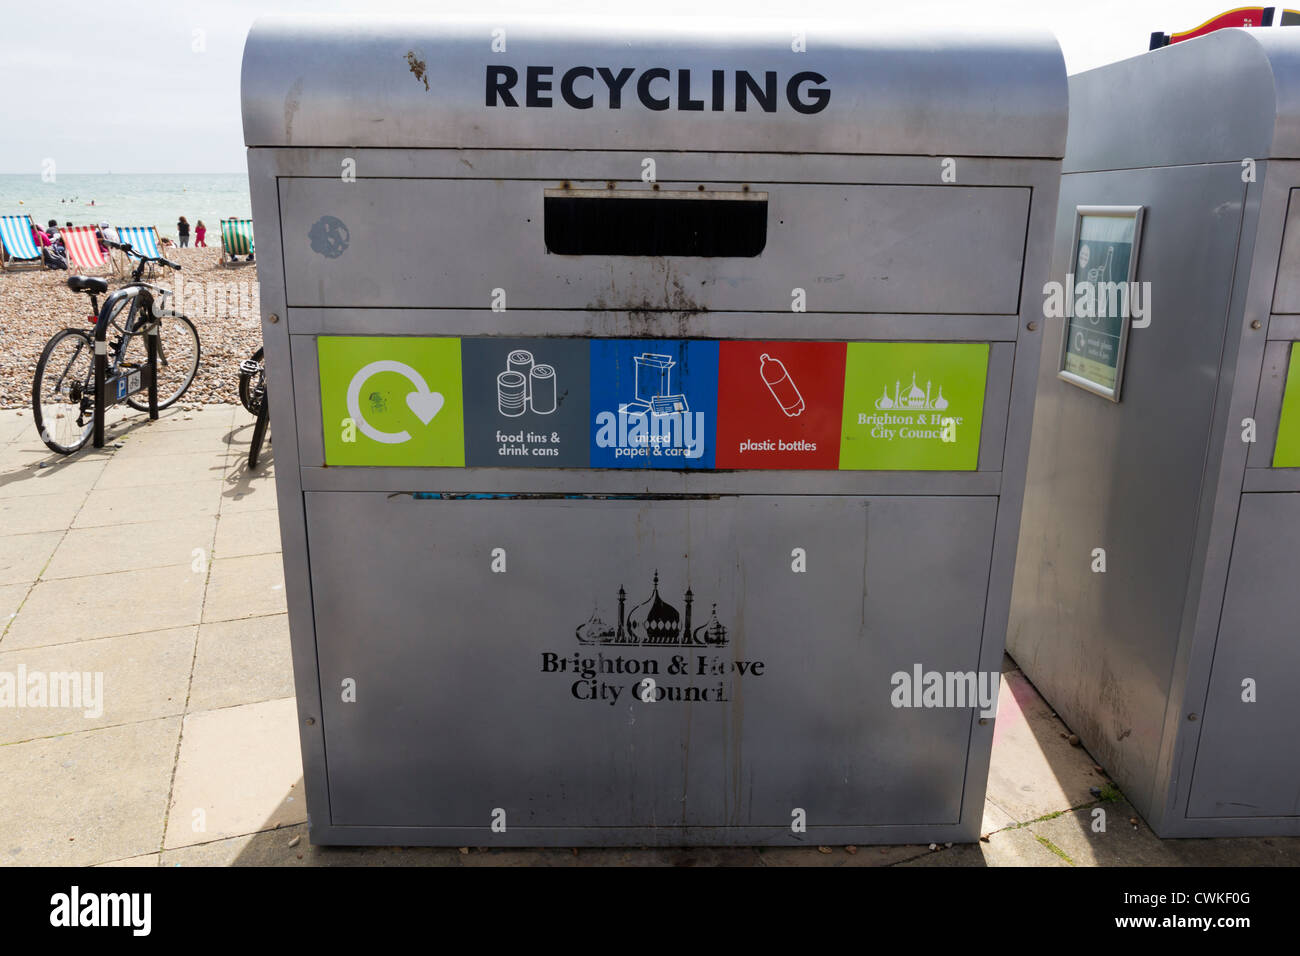 Recycling bin on Brighton beach for tins, cans, paper, card and plastic bottles. Stock Photo